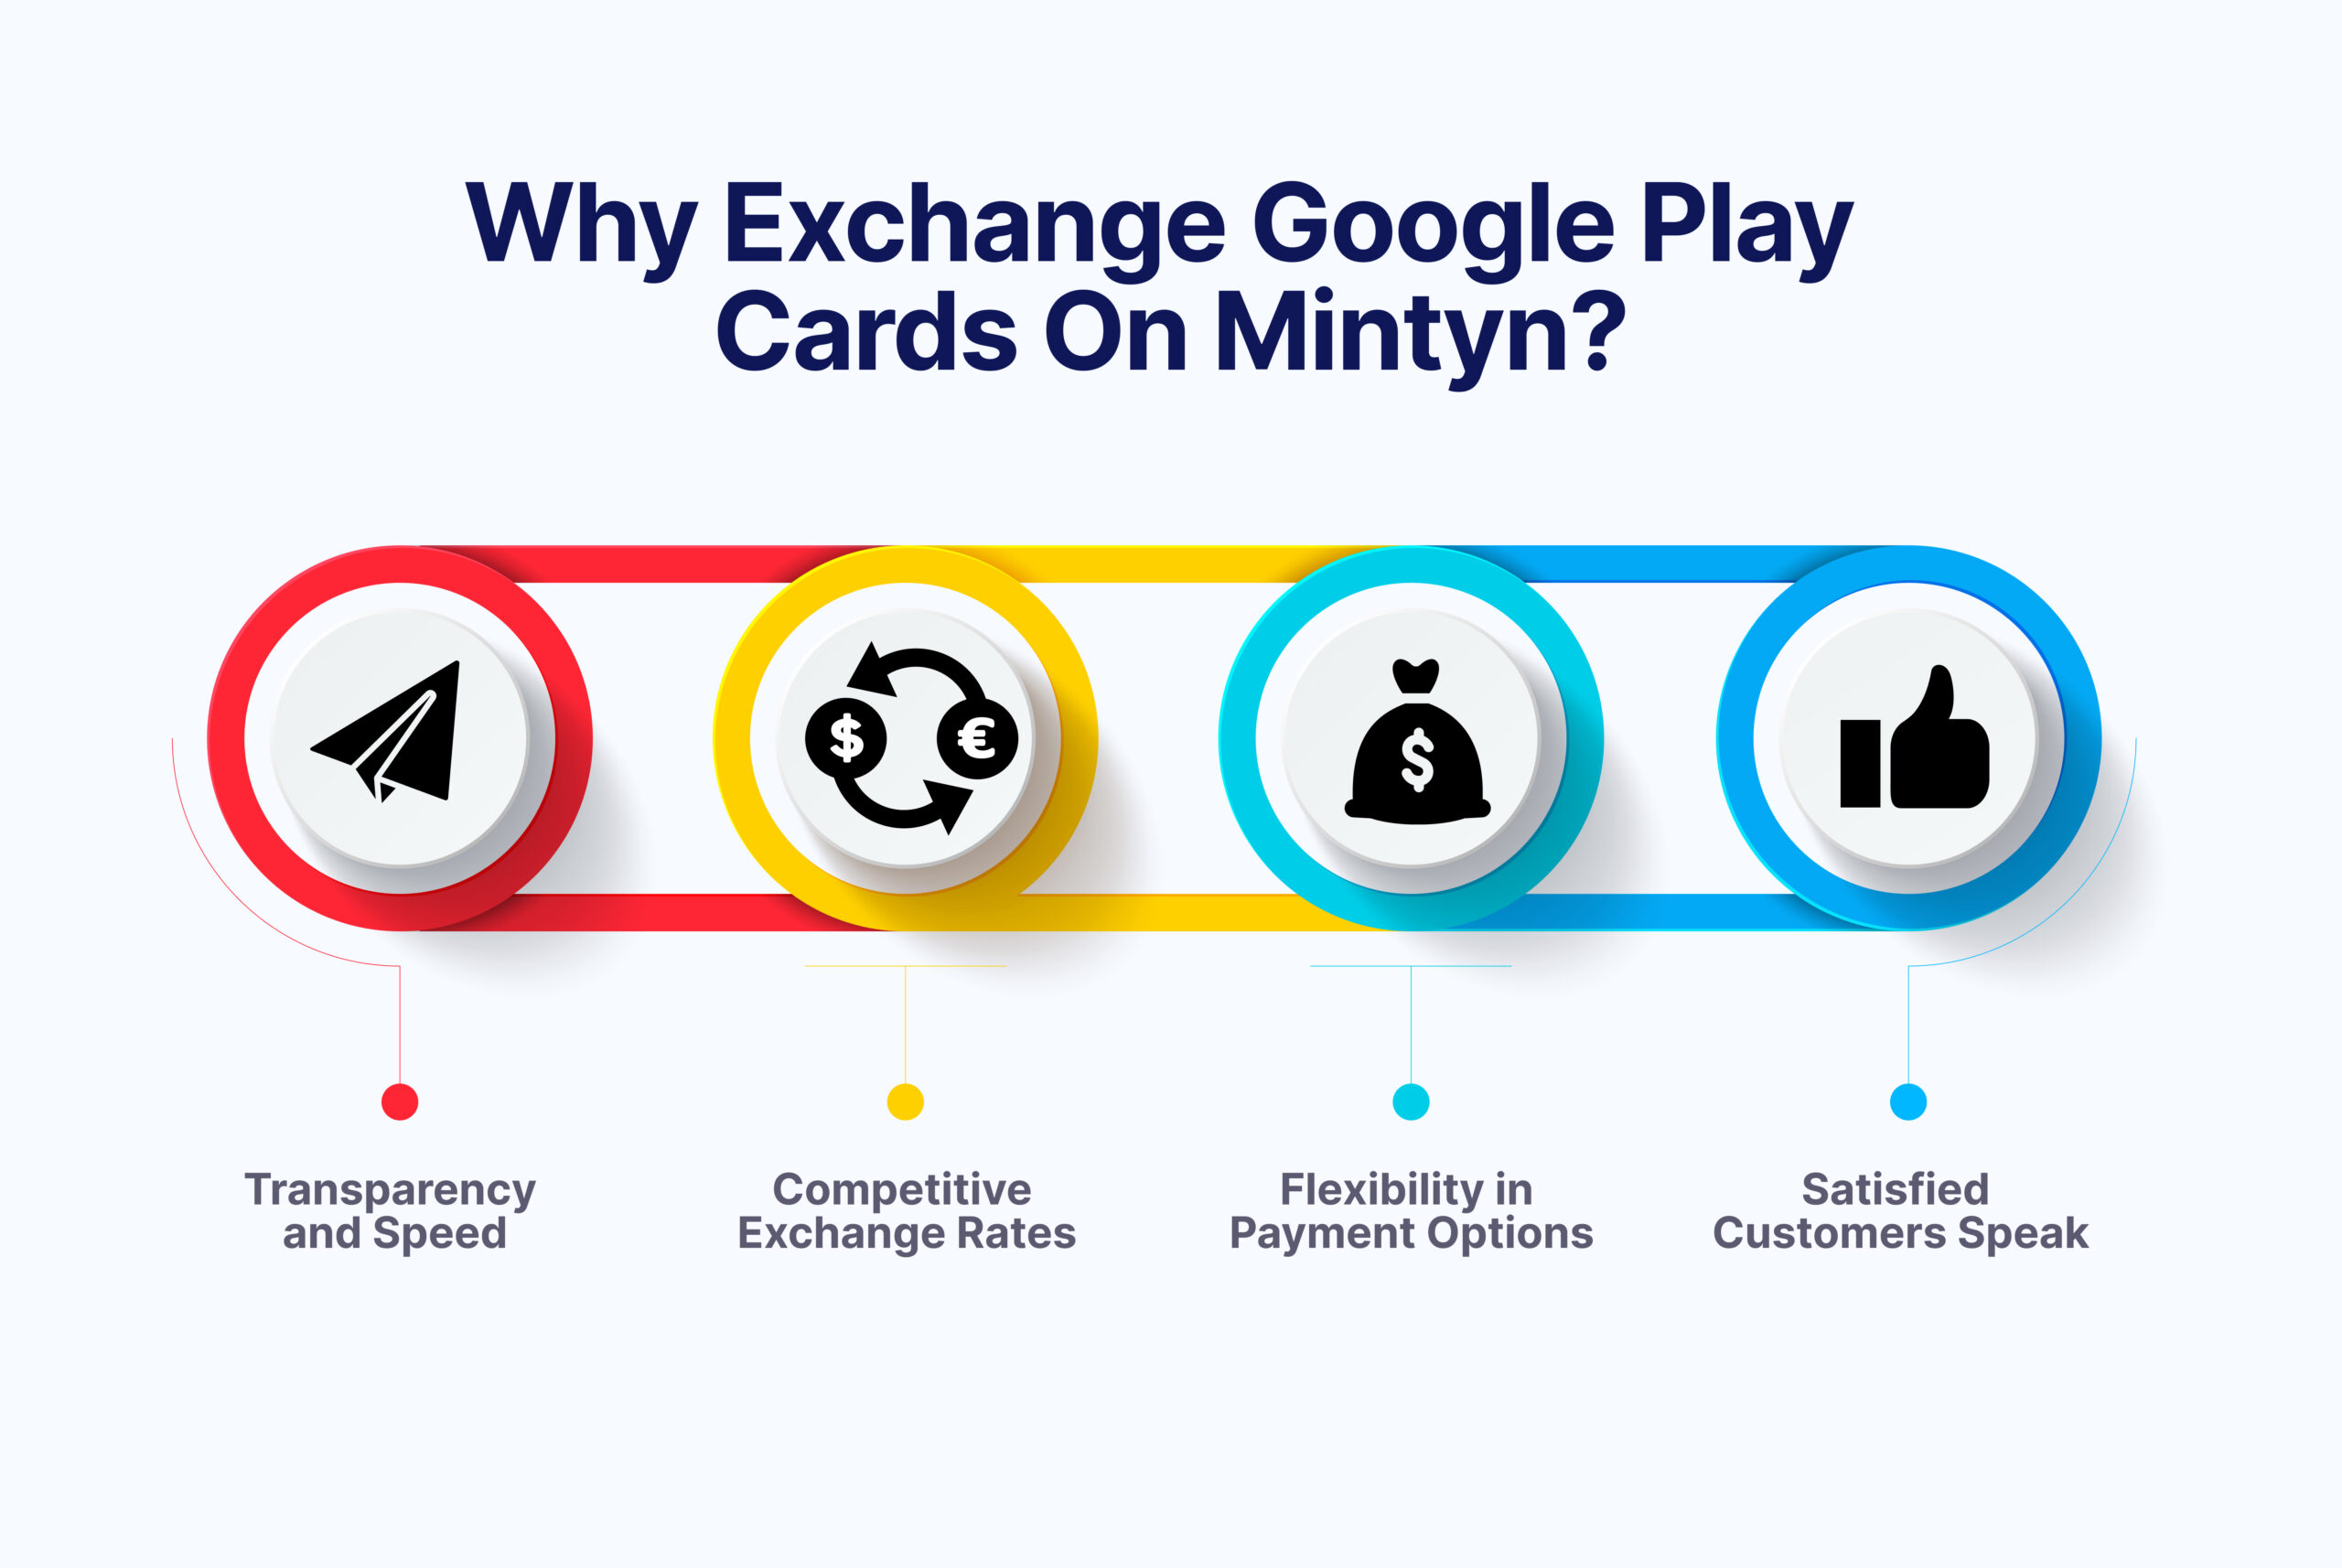 Why Exchange Google Play Cards on Mintyn